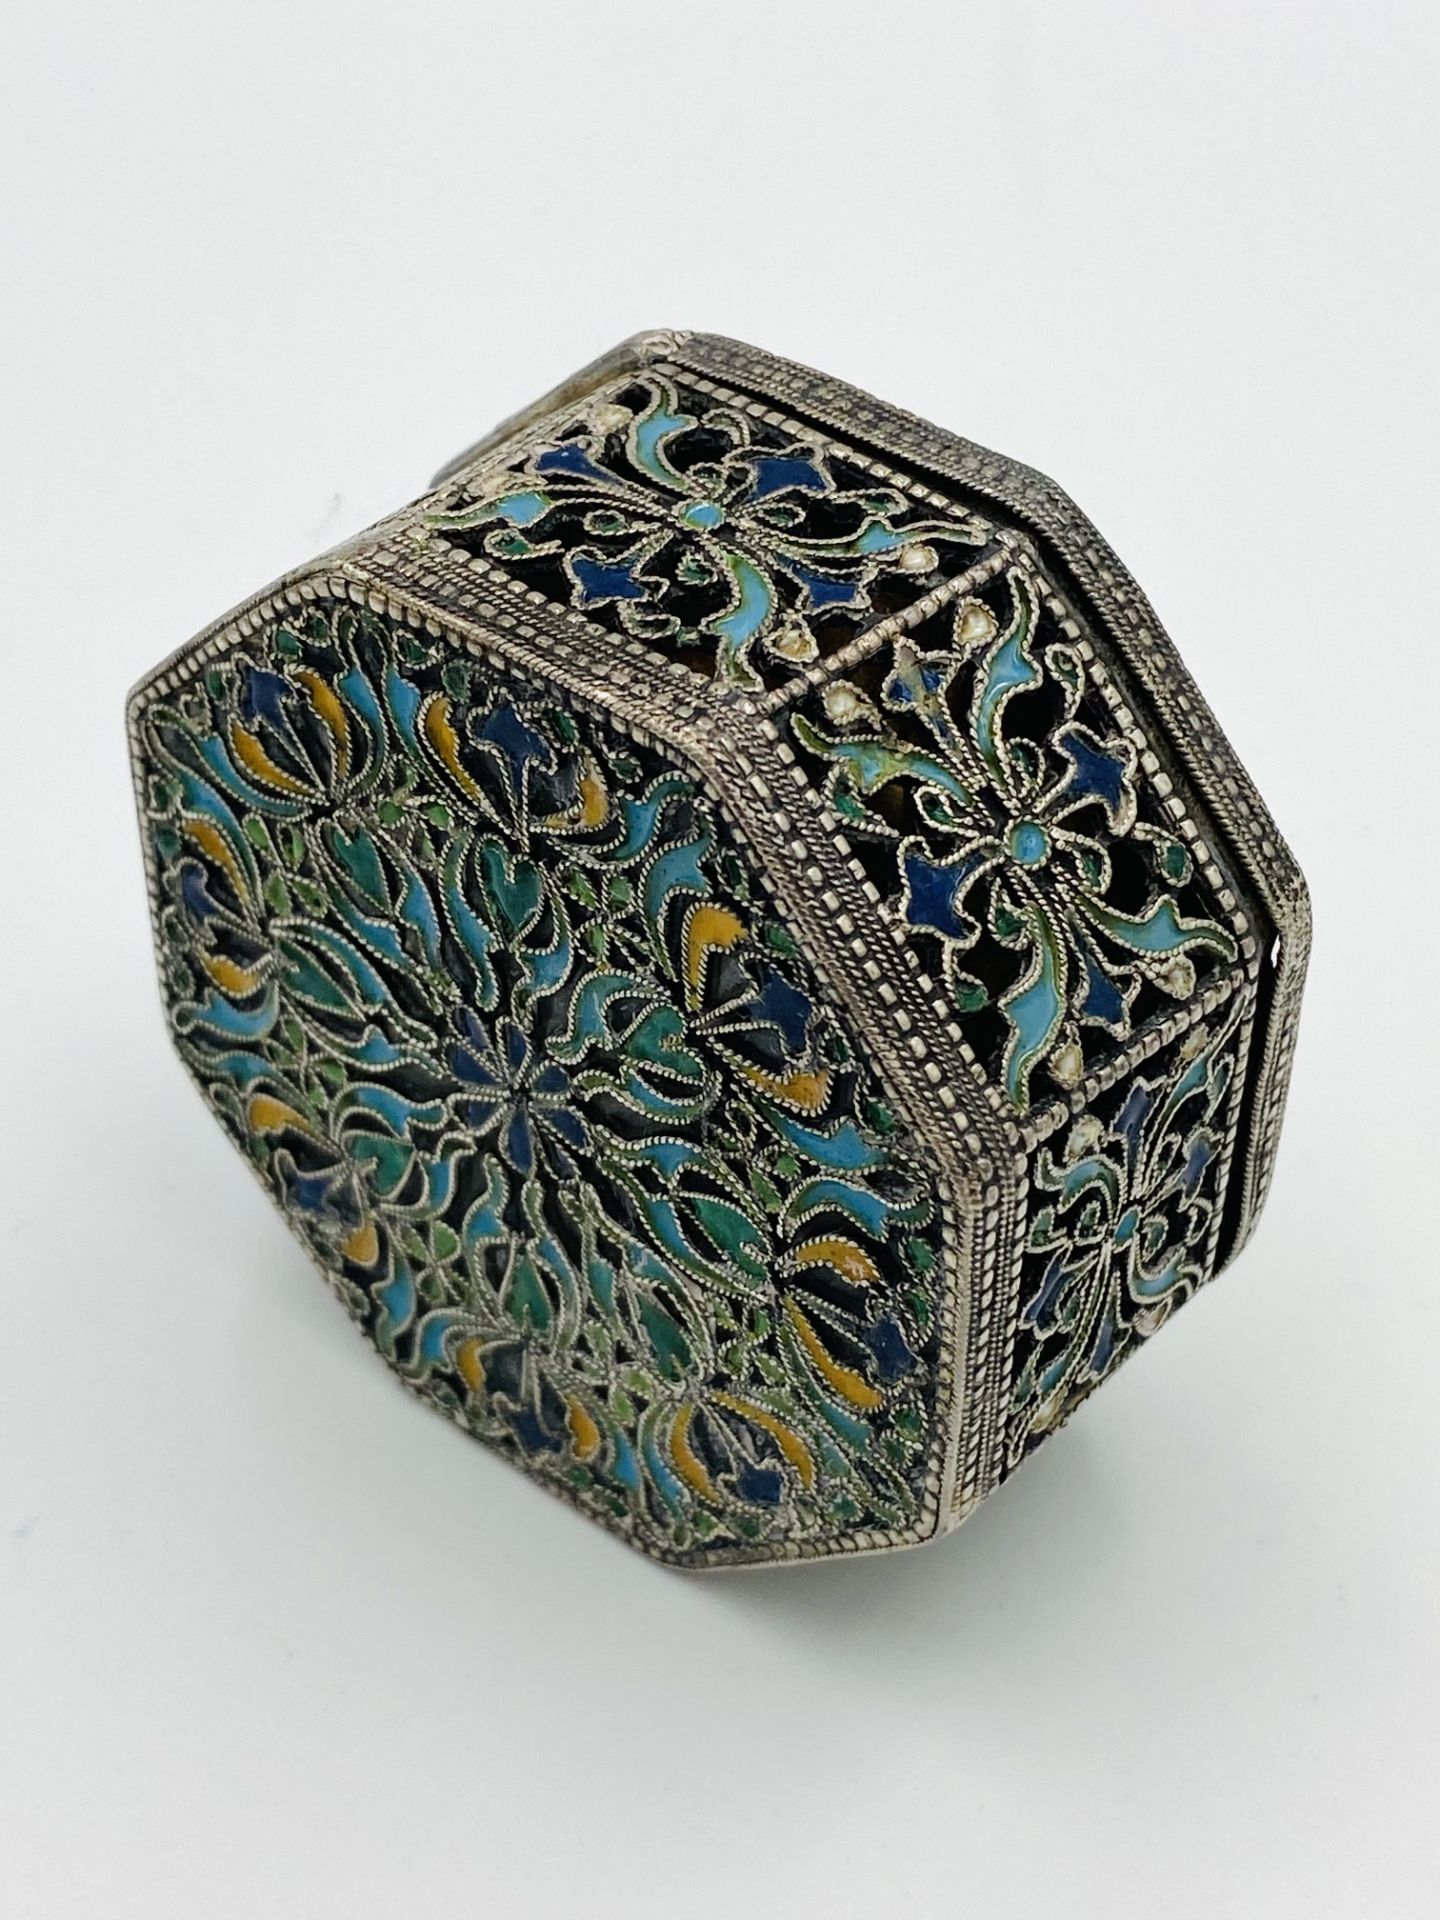 White metal box decorated in enamel - Image 3 of 5